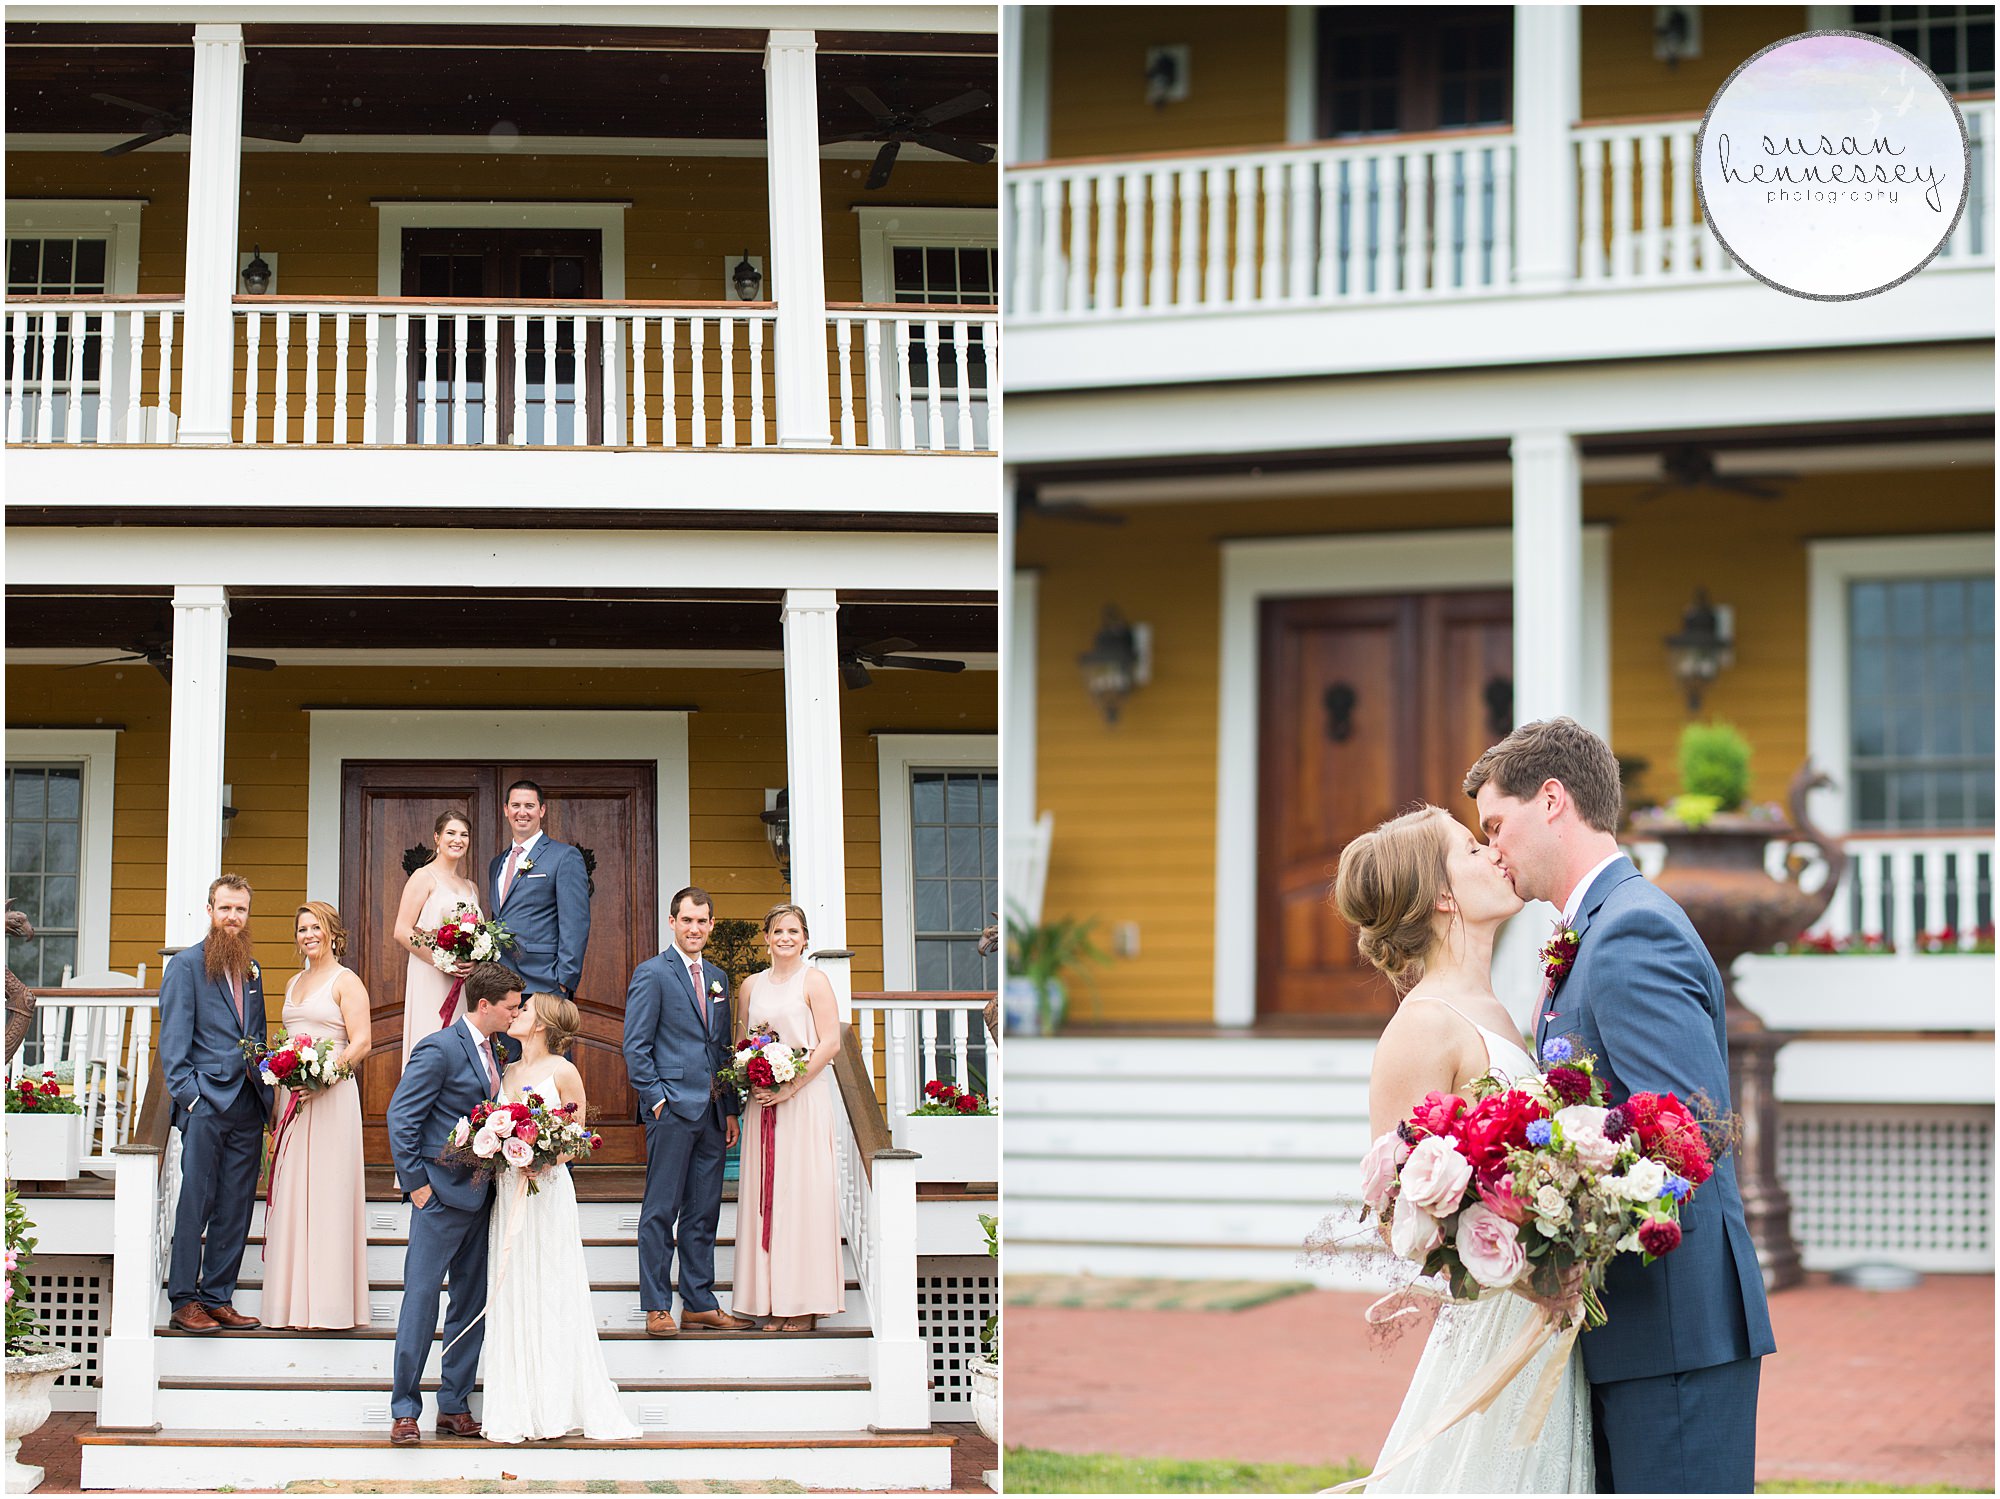 Best Wedding Venues in Cape May: Willow Creek Winery Bridal Party portraits